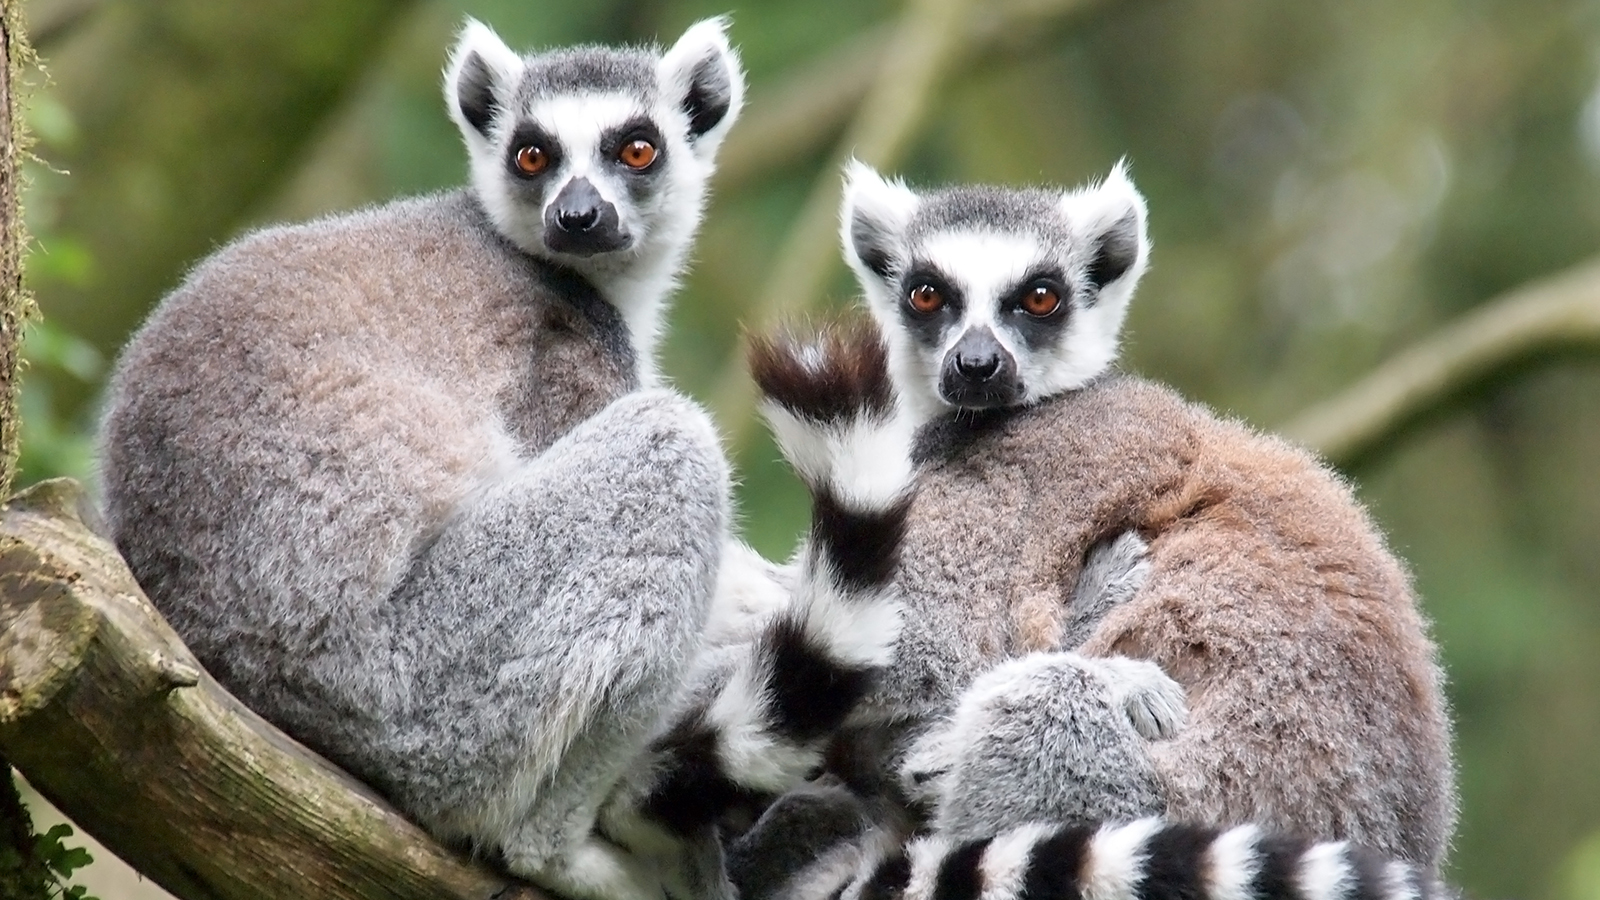 If You Can Get 13/16 on This Geography Quiz, You Probably Know Waaaaay Too Much ring tailed lemurs